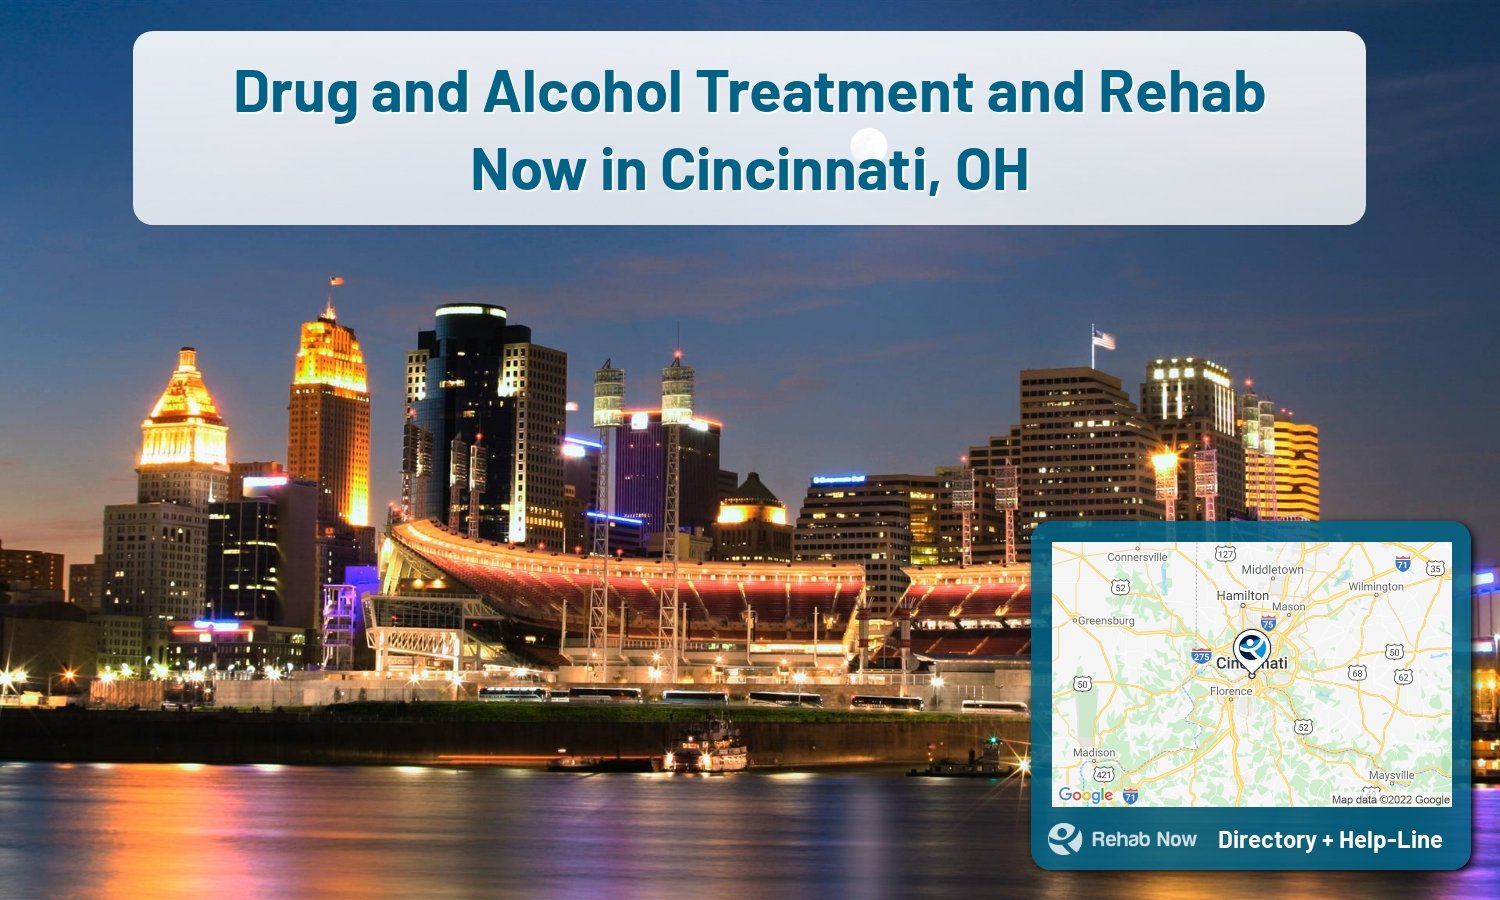 Cincinnati, OH Treatment Centers. Find drug rehab in Cincinnati, Ohio, or detox and treatment programs. Get the right help now!